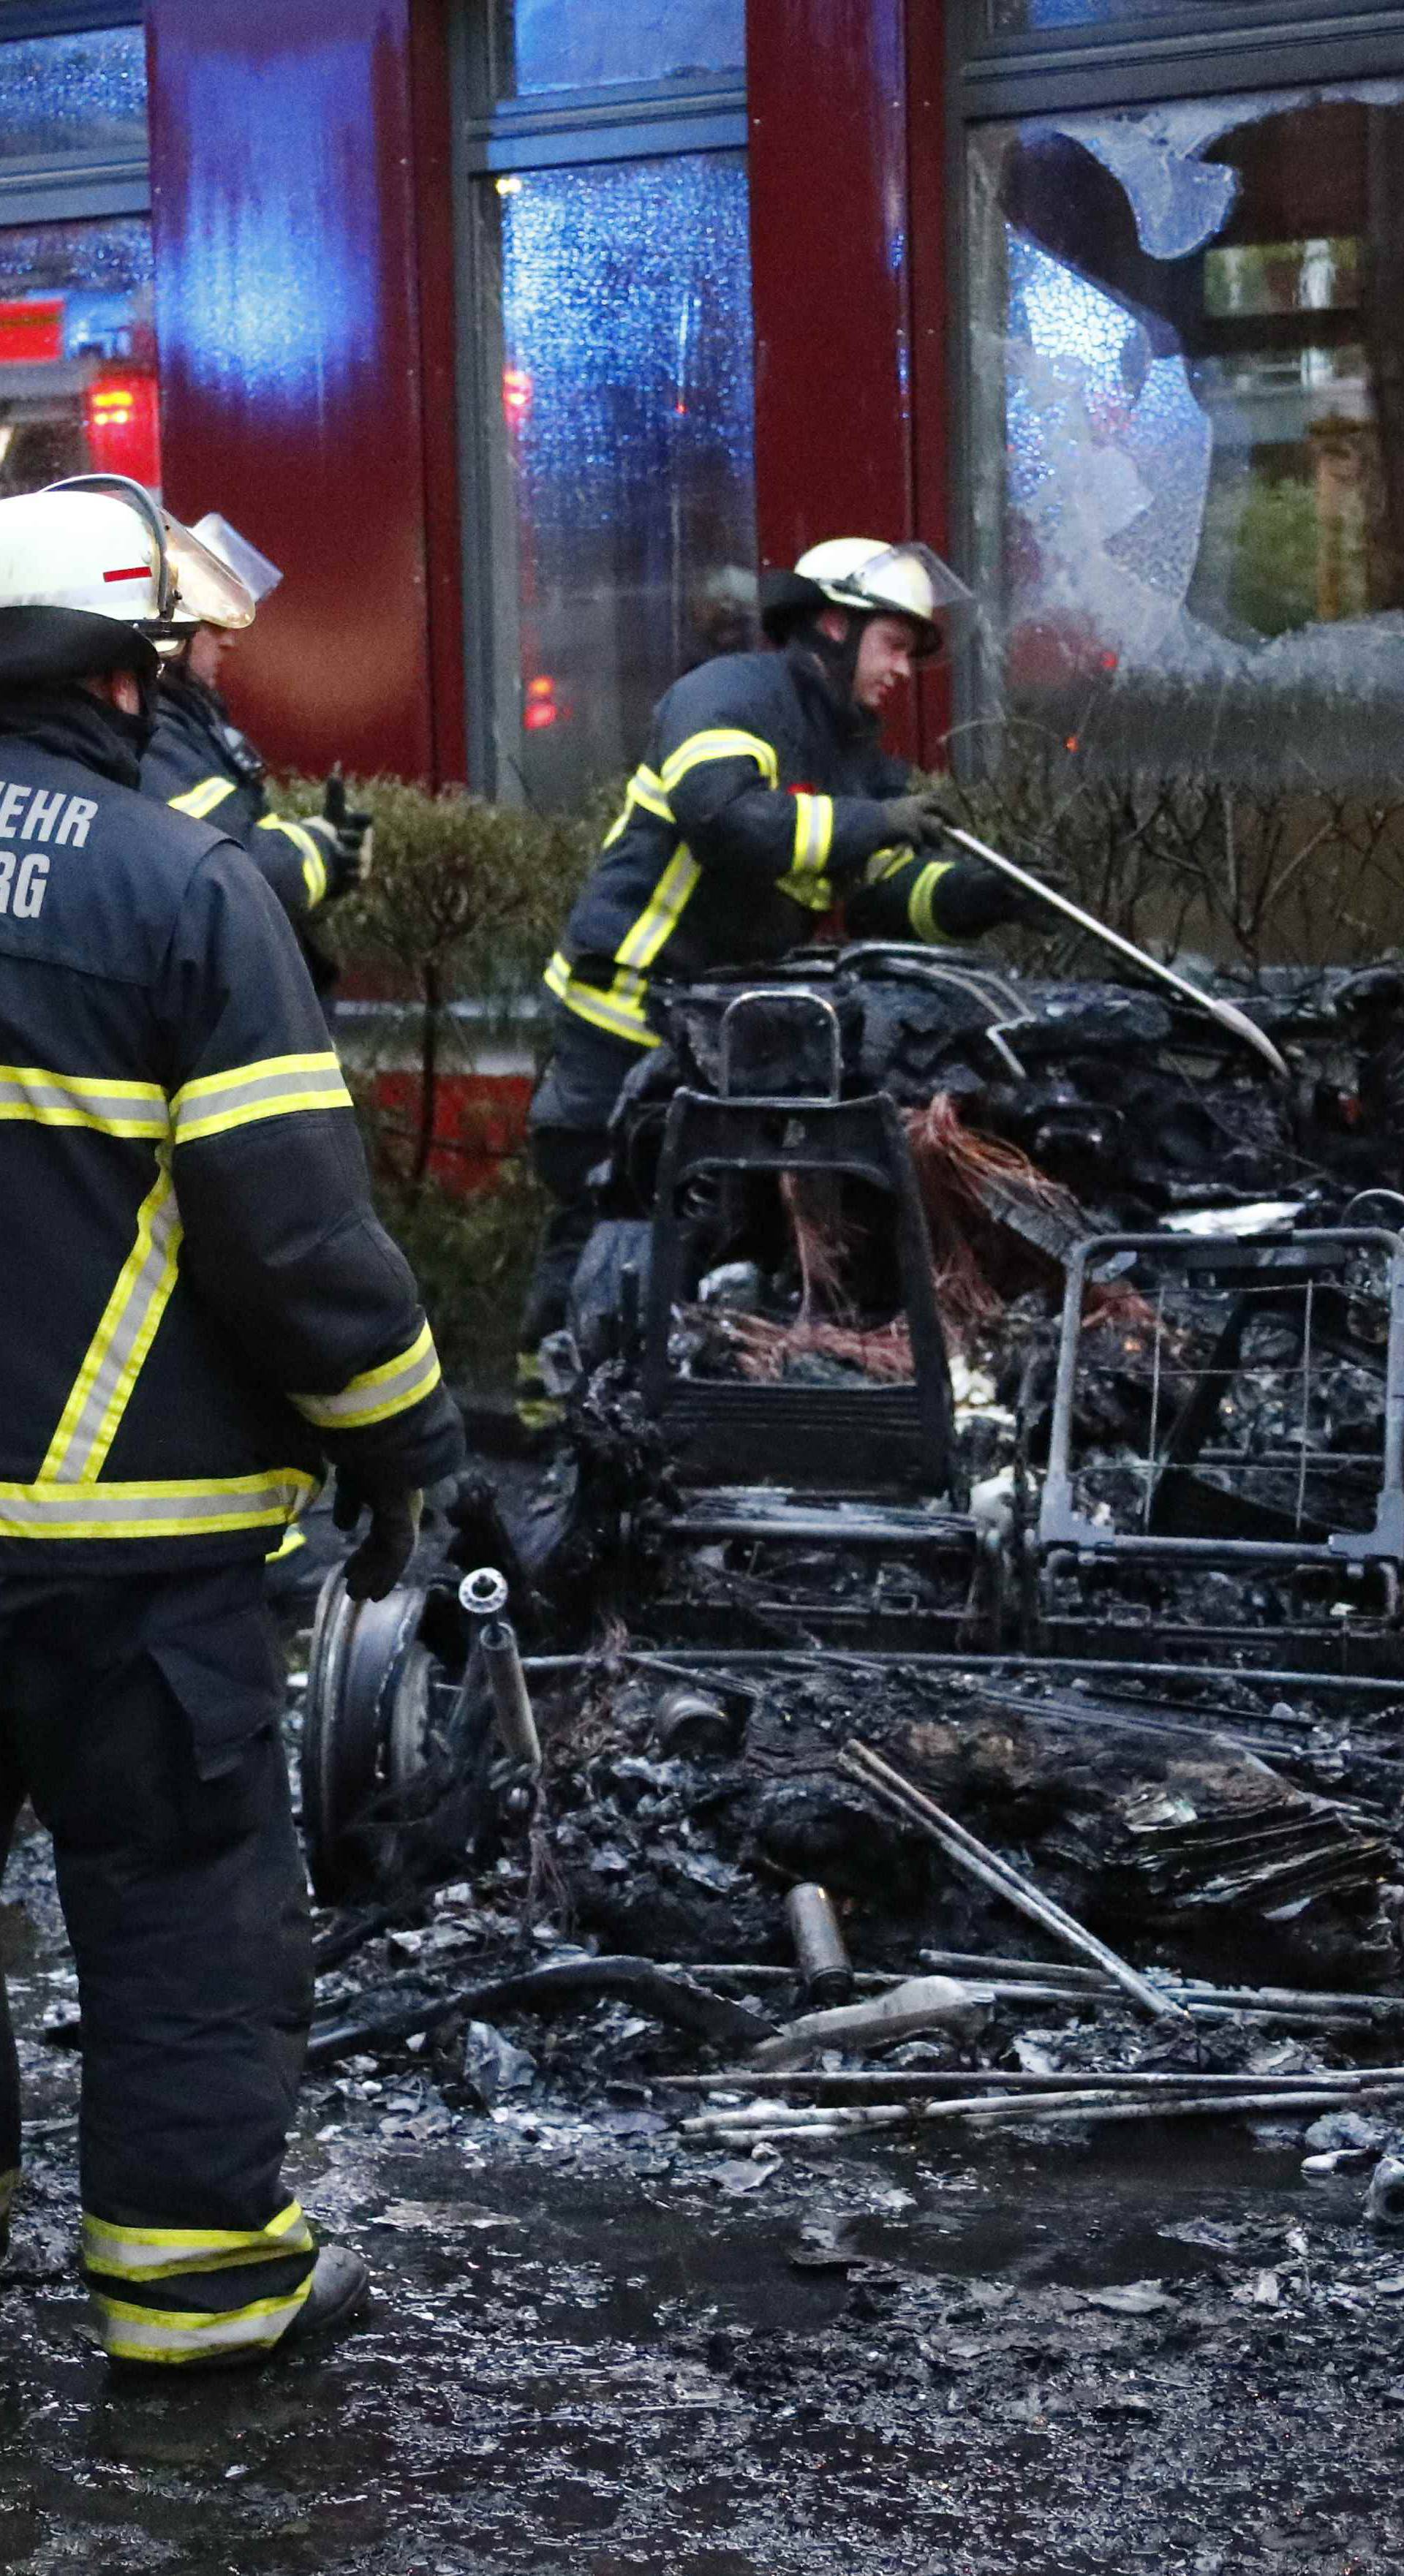 Firefighters inspect burnt out vehicles during the demonstrations during the G20 summit in Hamburg